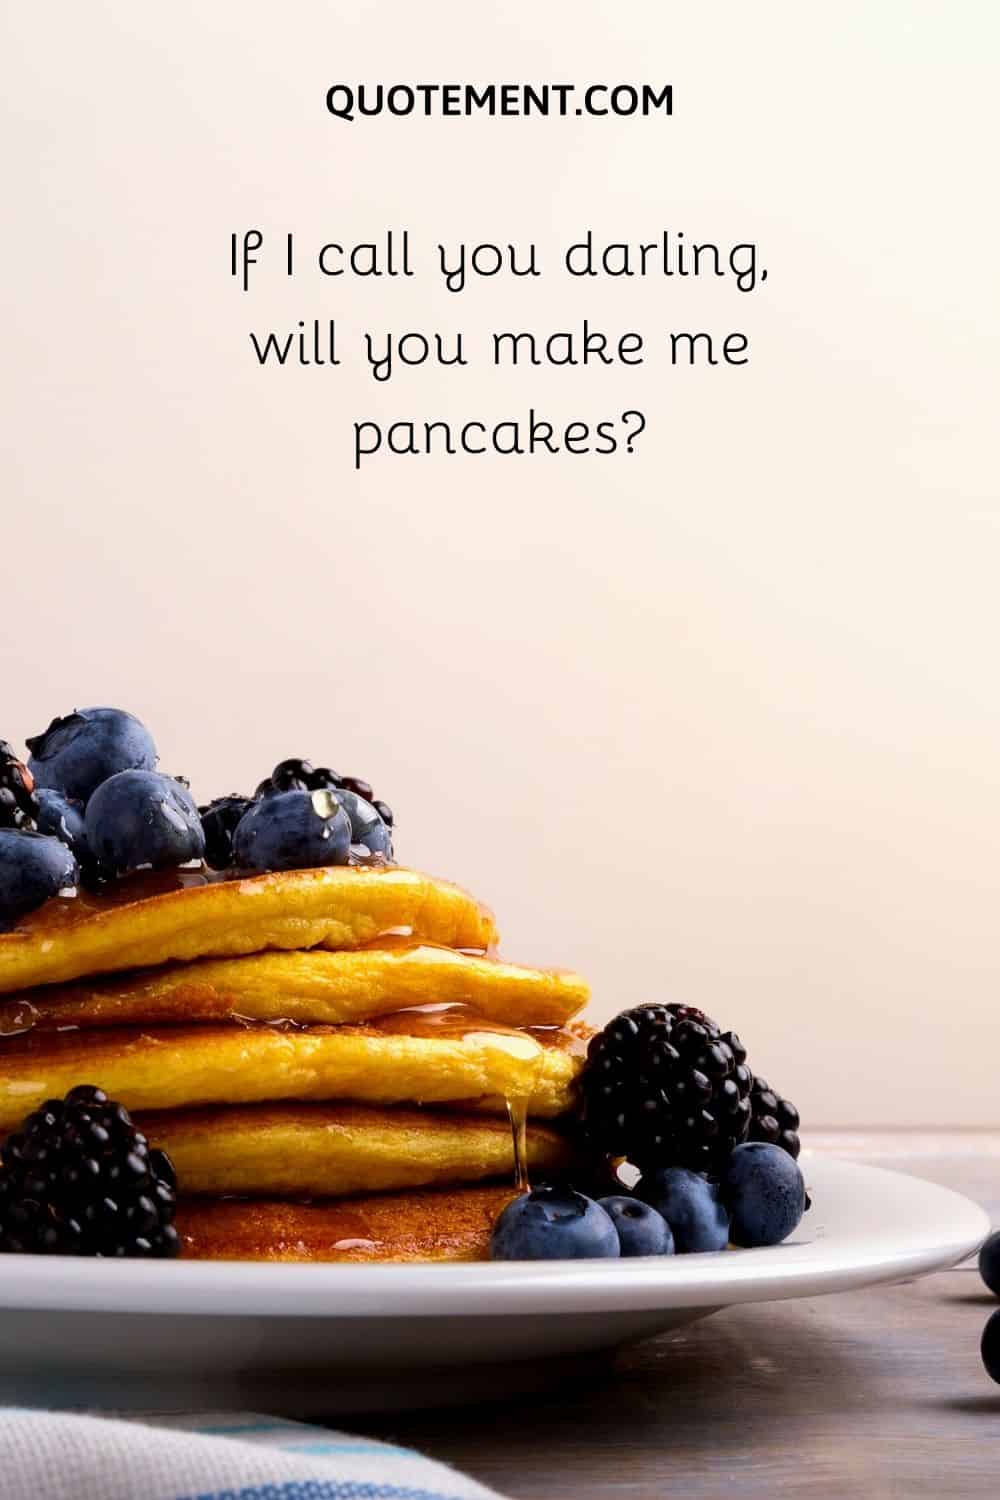 If I call you darling, will you make me pancakes